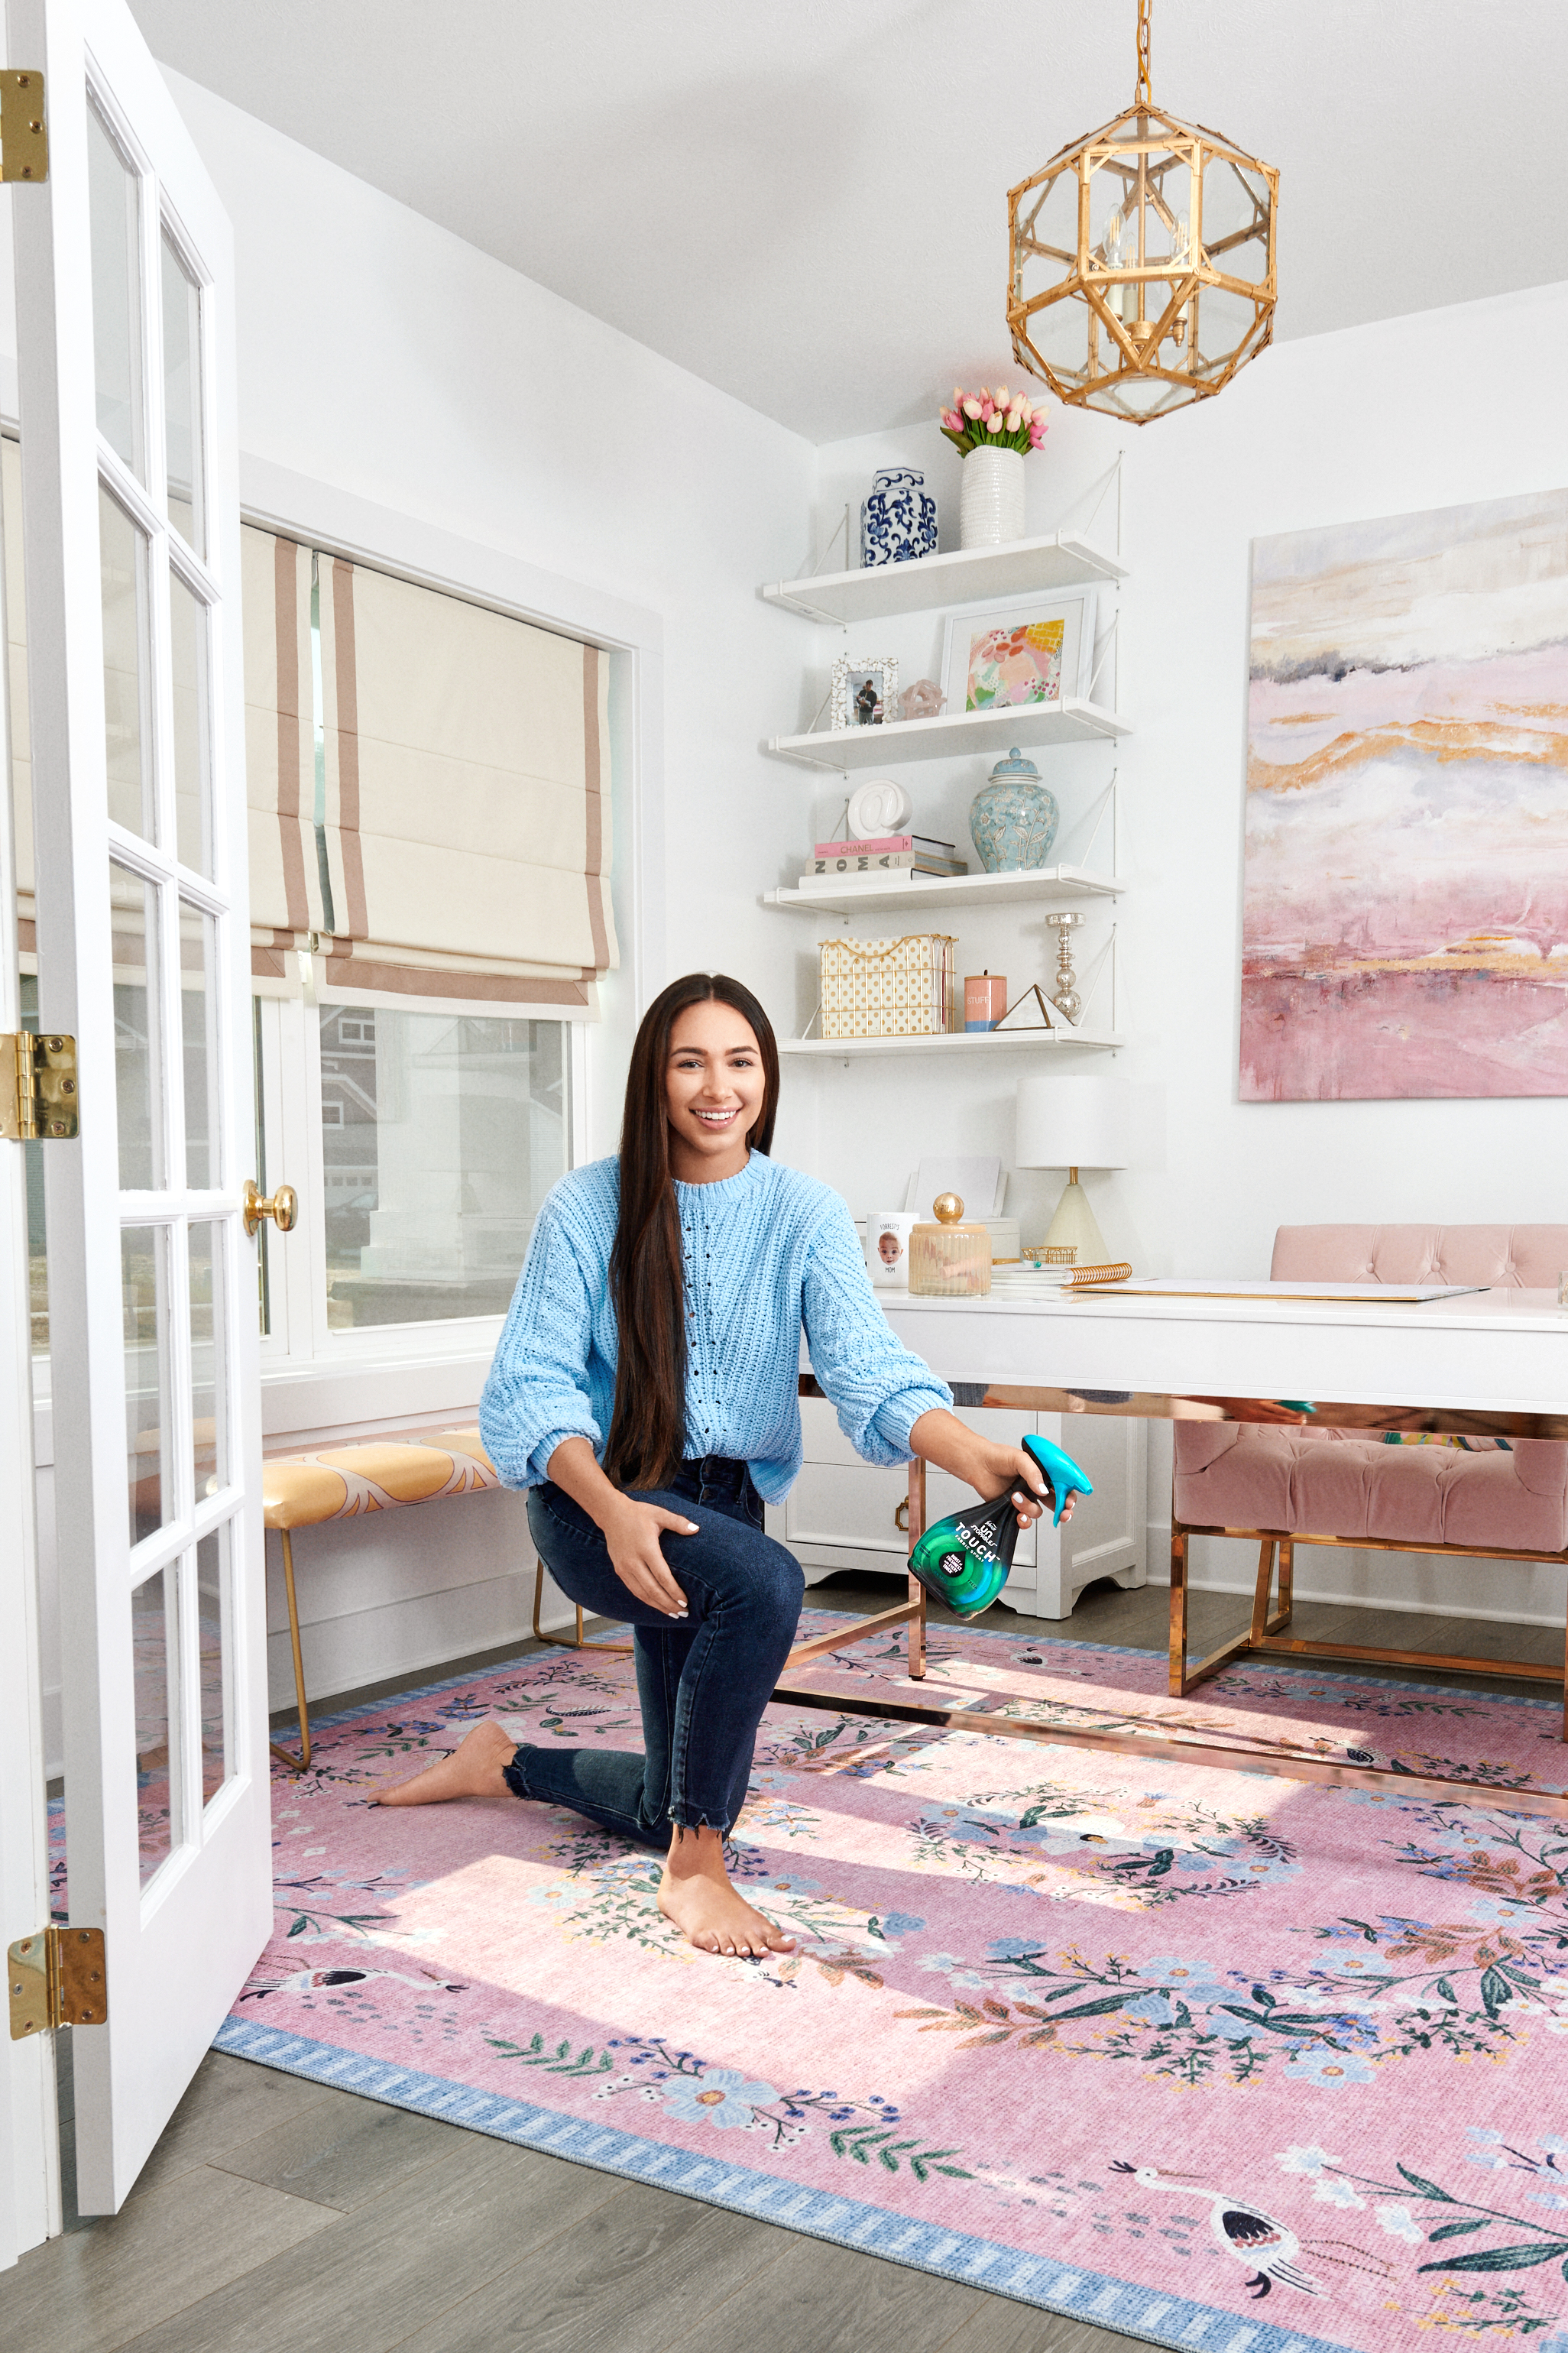  Woman spraying Febreeze on a rug for Real Simple by Alison Gootee Photography